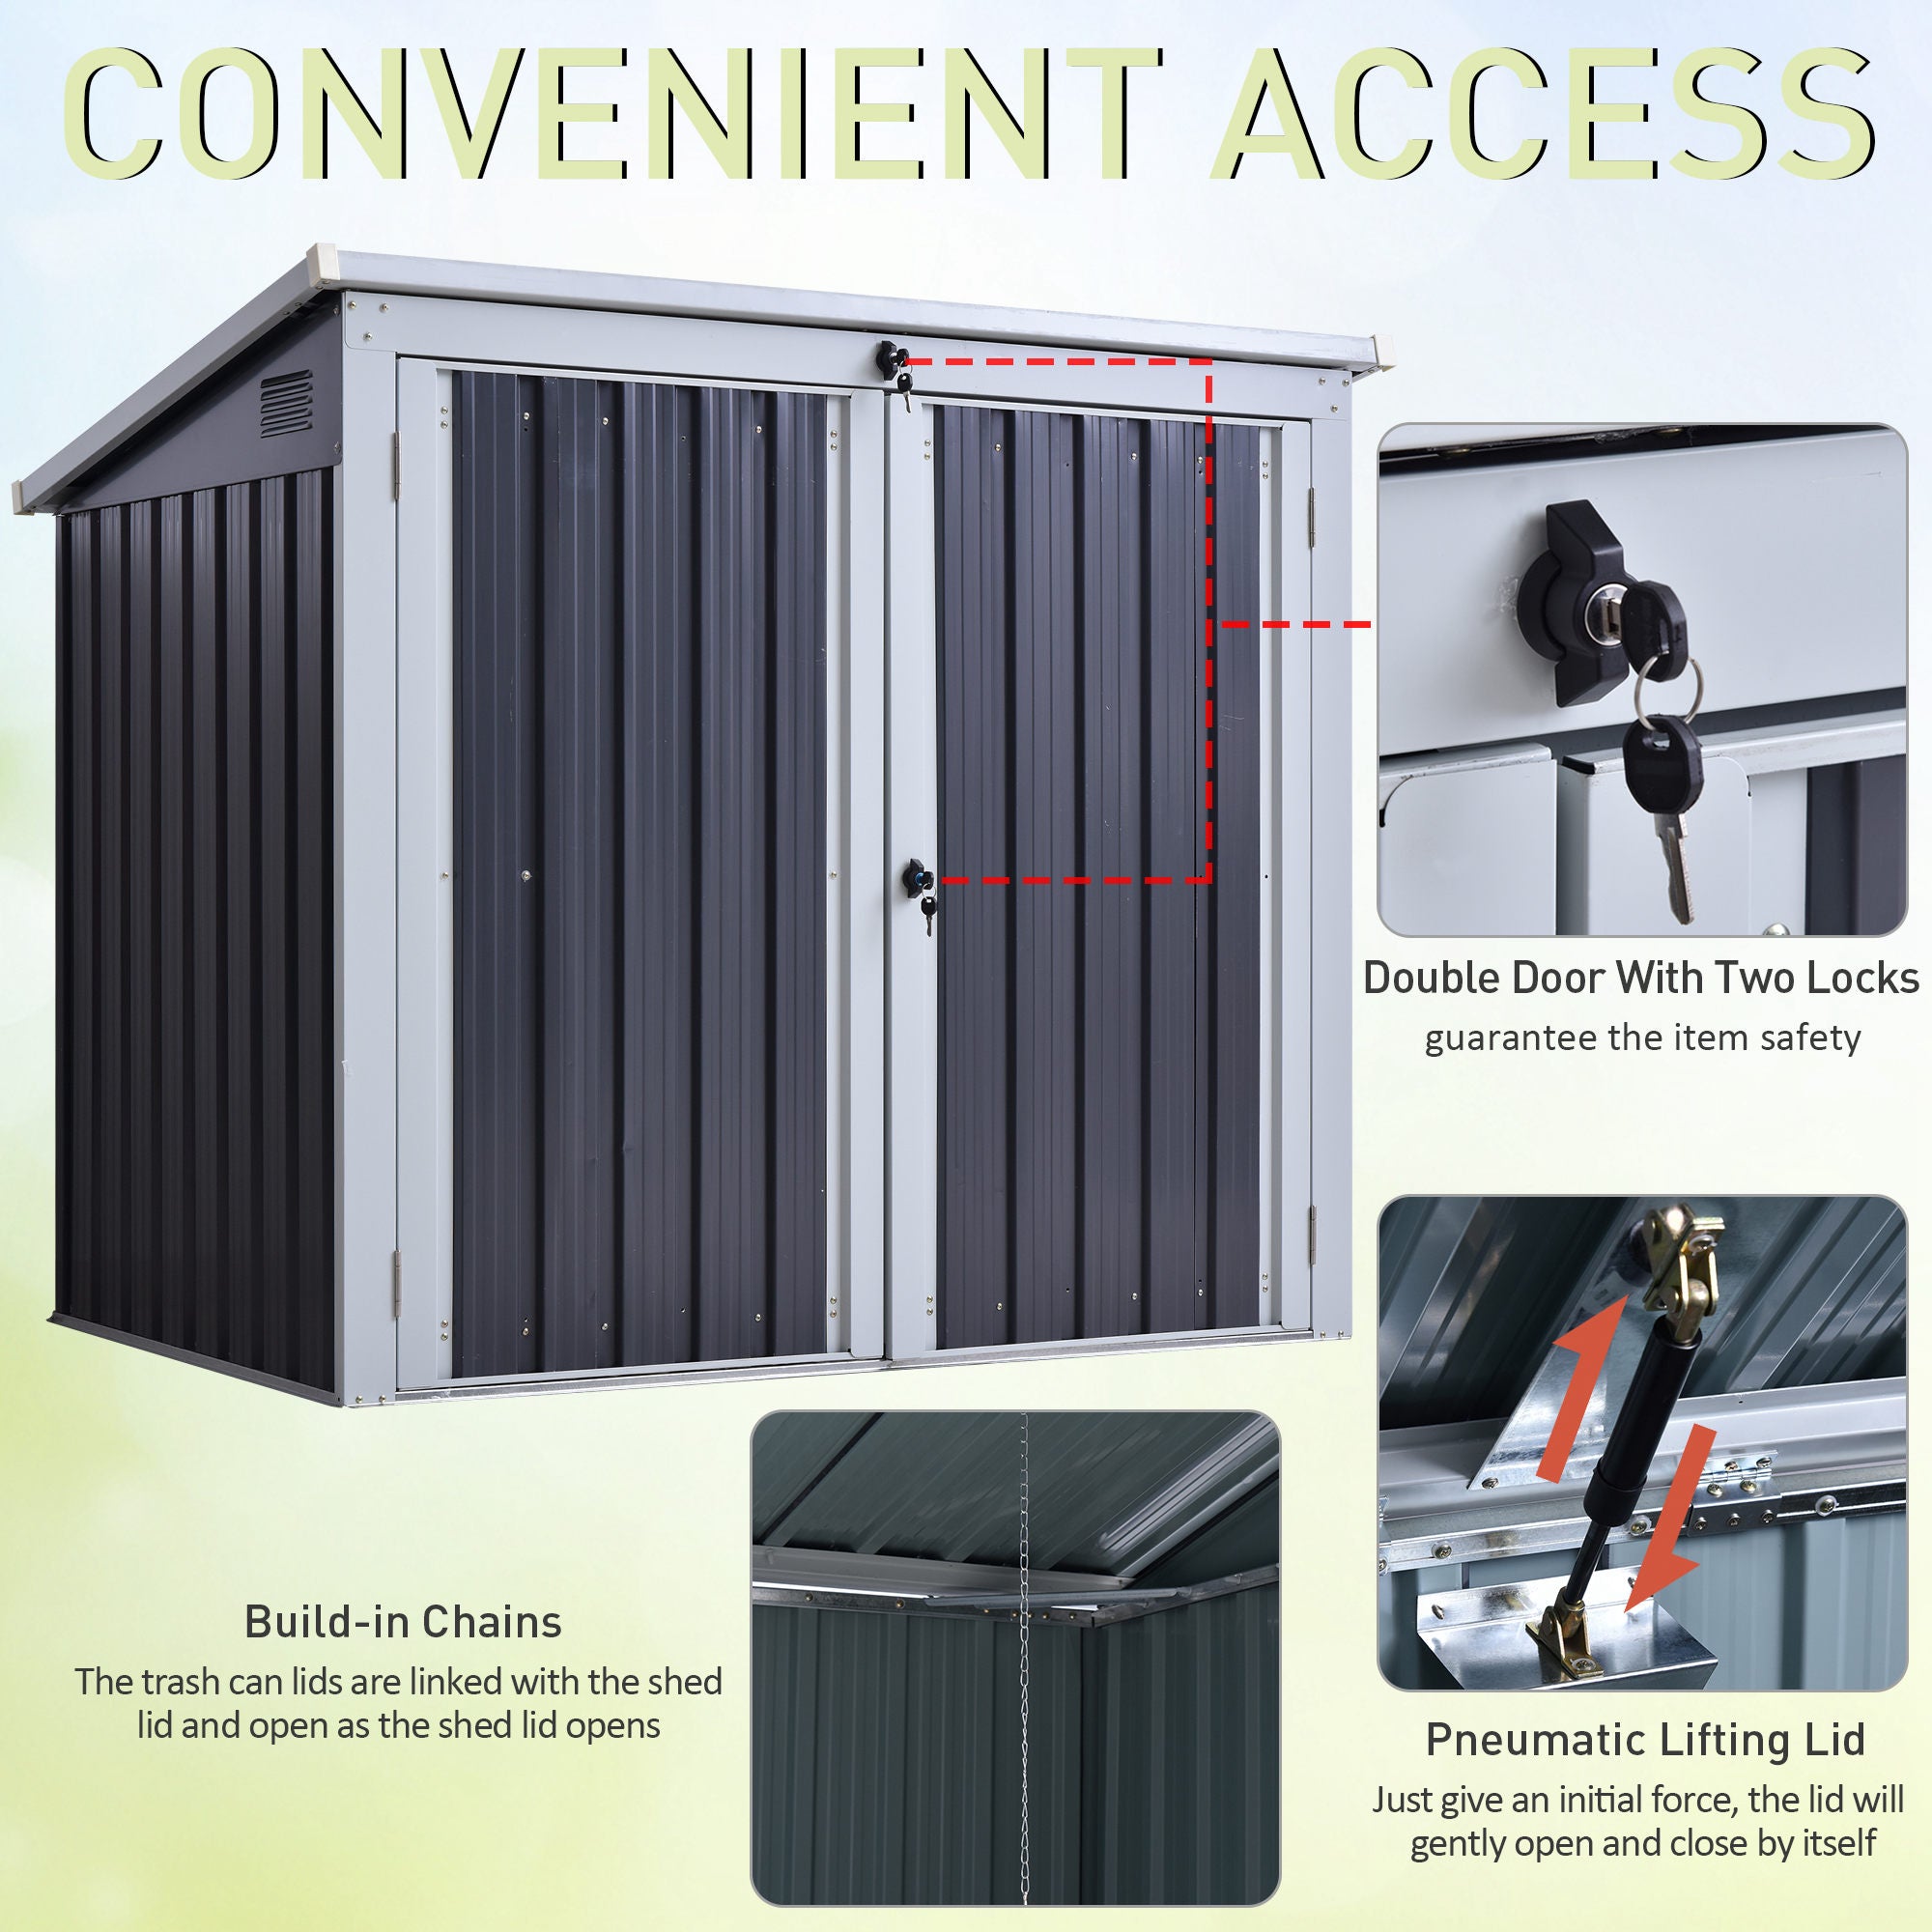 Outsunny 5ft x 3ft Garden 2-Bin Corrugated Steel Rubbish Storage Shed w/ Locking Doors Lid Outdoor Hygienic Dustbin Unit Garbage Trash Cover - Inspirely